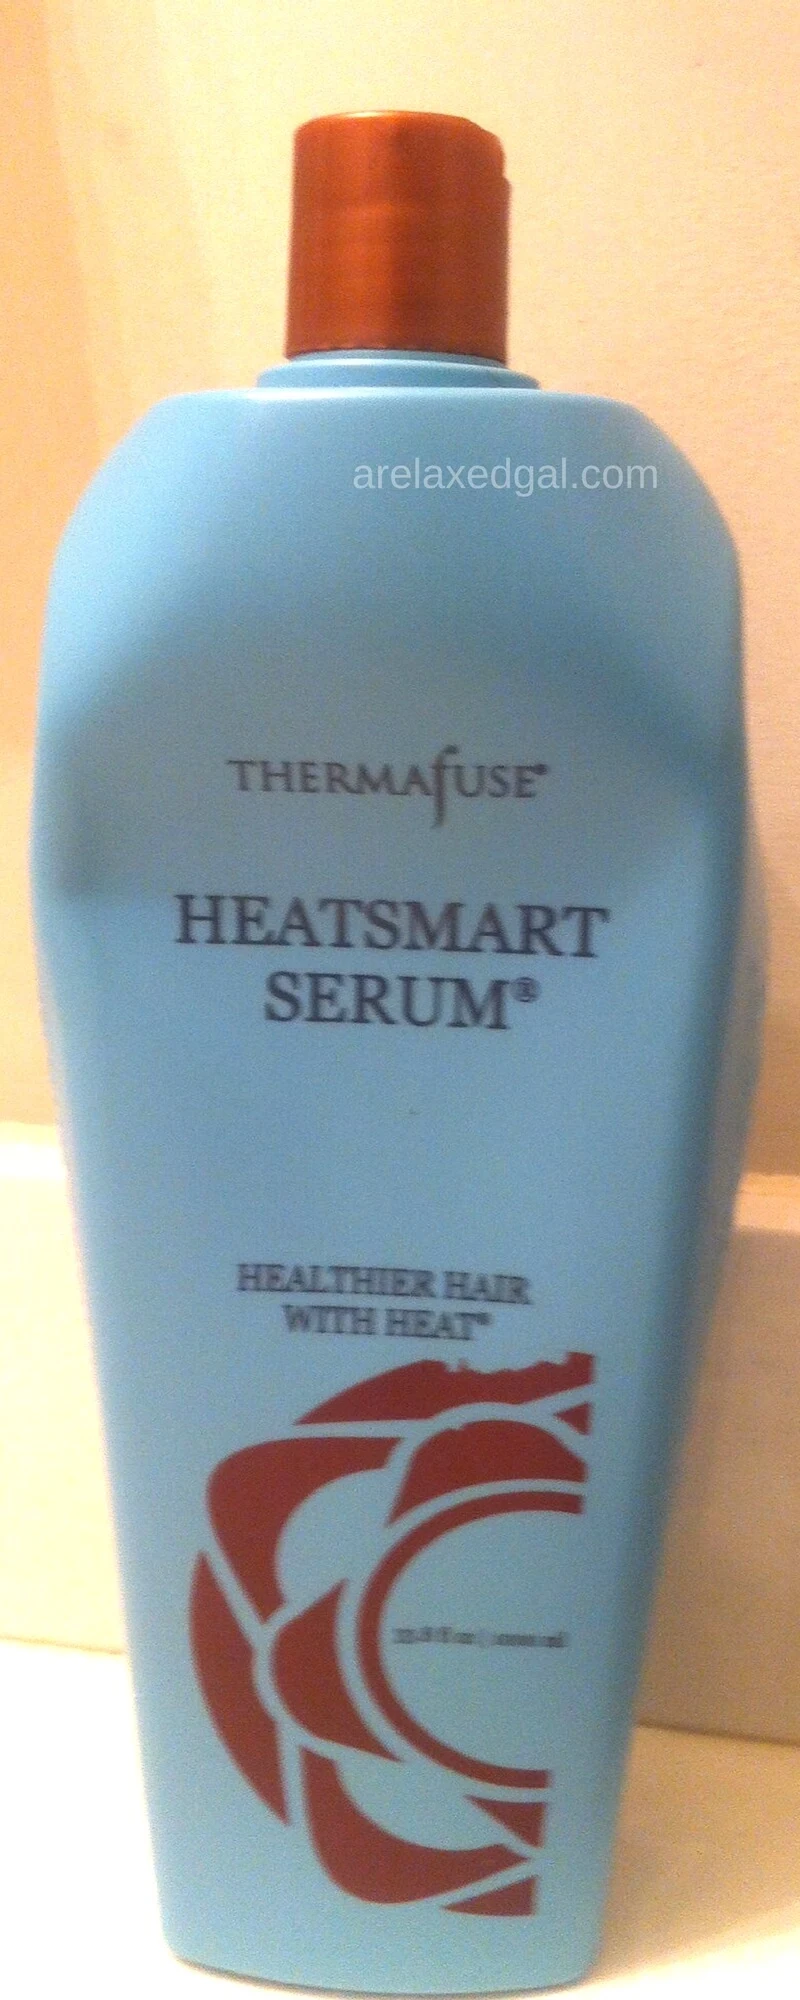 If you're looking for a salon level conditioner for curly, frizzy, dry or damaged hair Thermafuse's HeatSmart Serum Condition is one to consider for your relaxed hair. | arelaxedgal.com